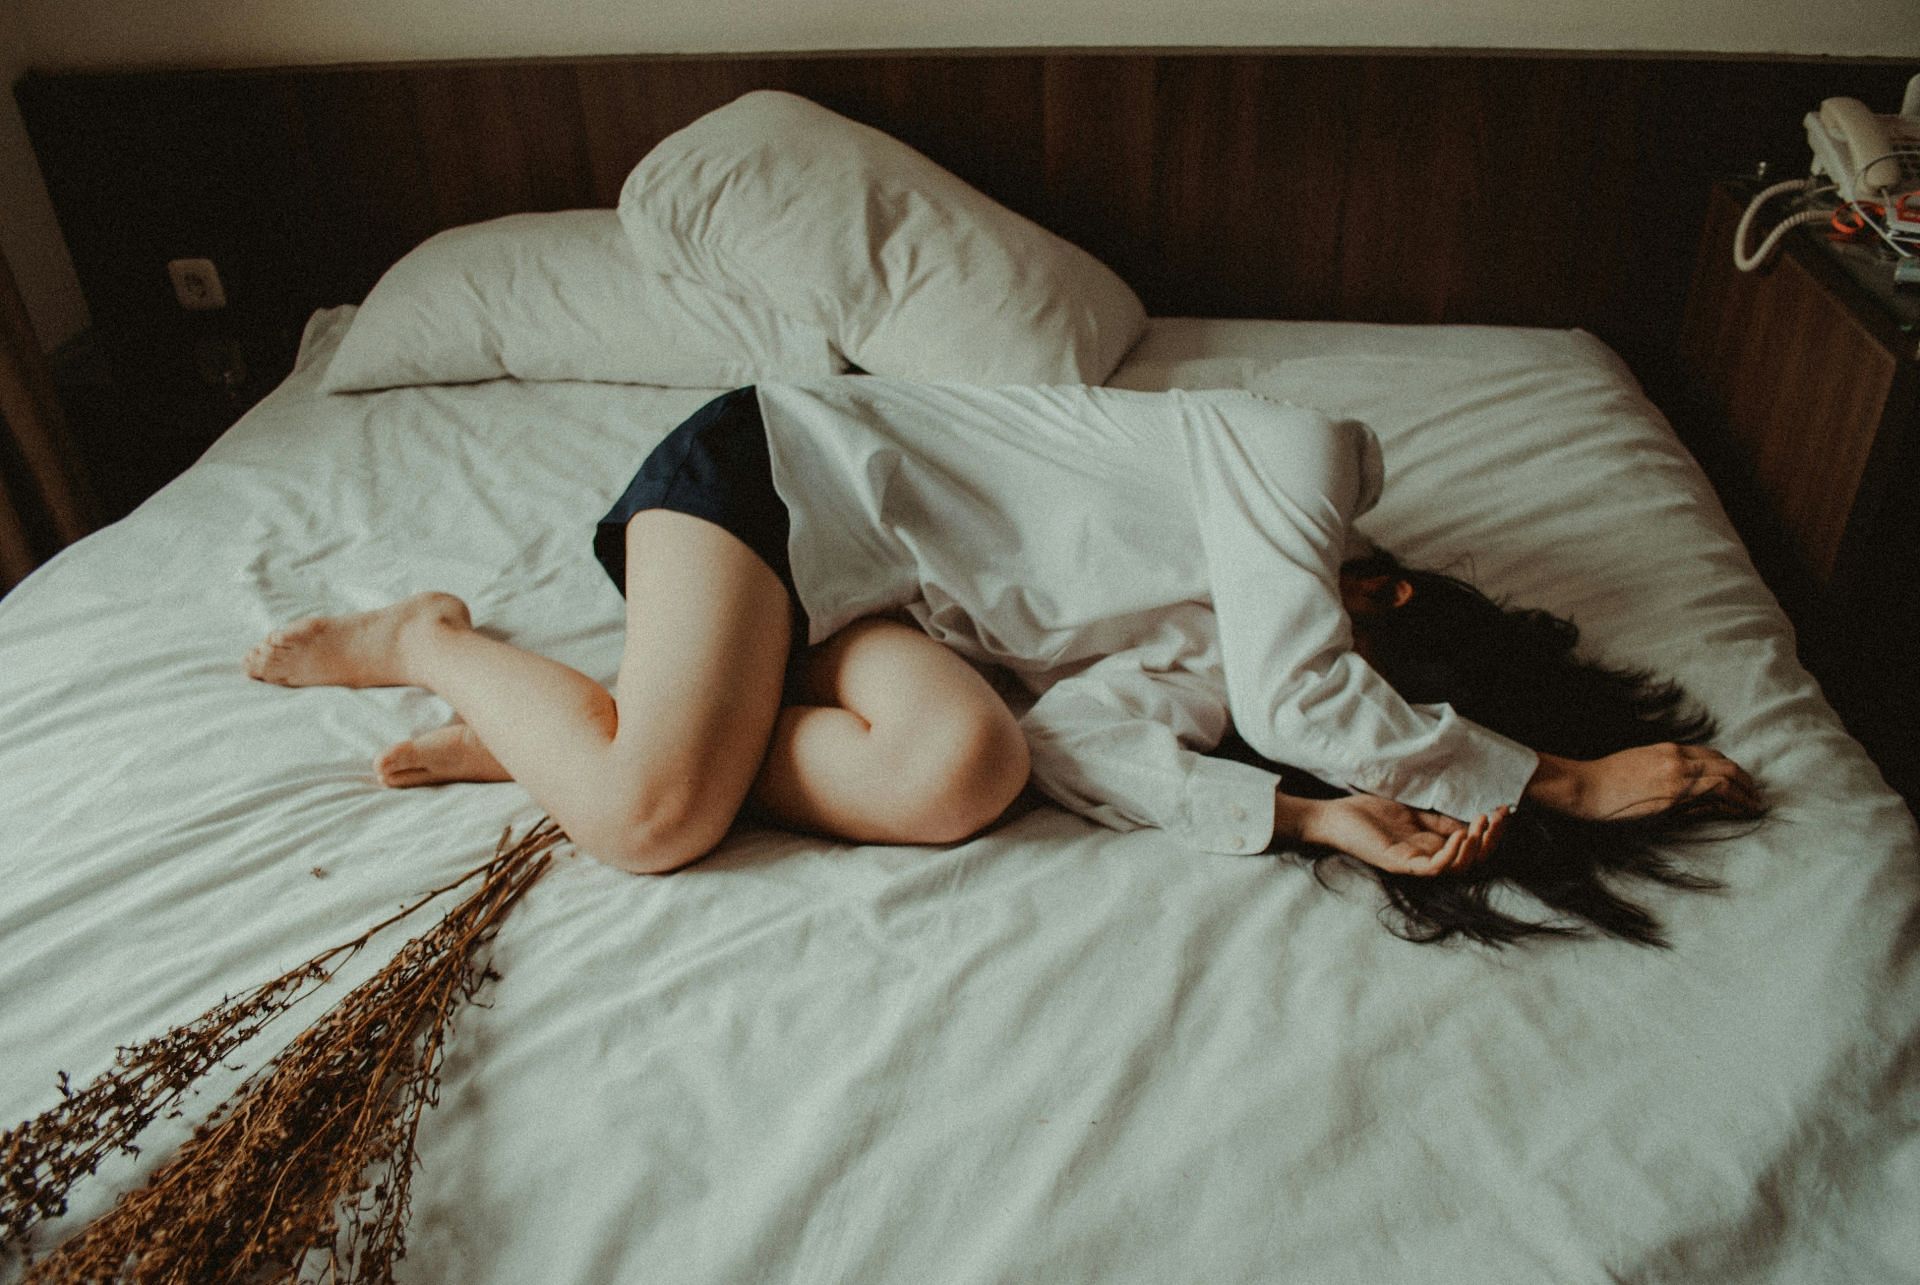 Gallbladder attack or stomach pain?(Image by Yuris Alhumaydy/Unsplash)